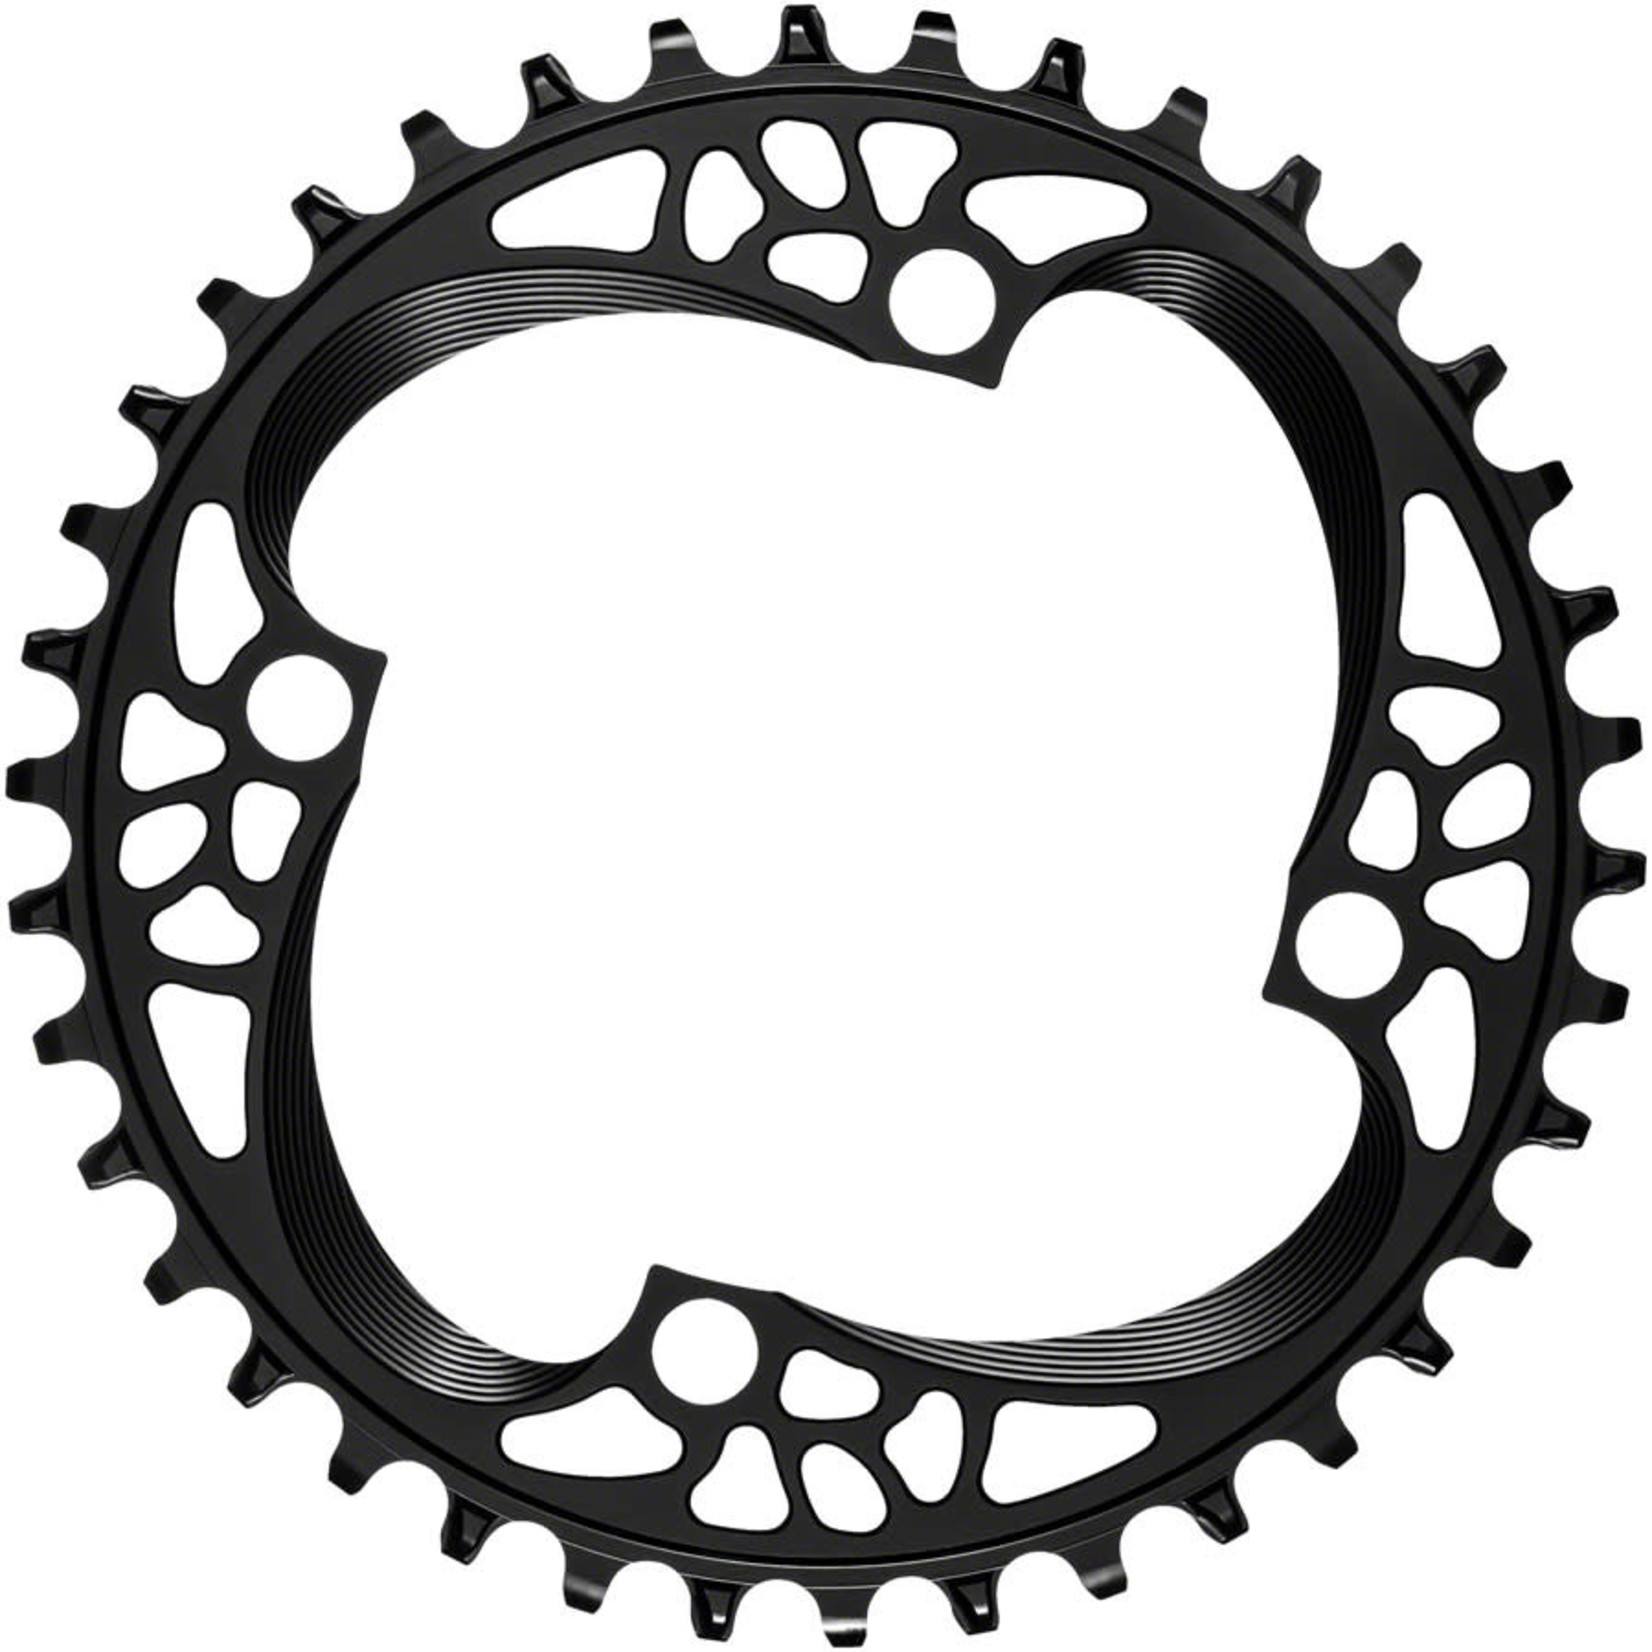 Absolute Black 104 Chainring, 104BCD 36T - Black